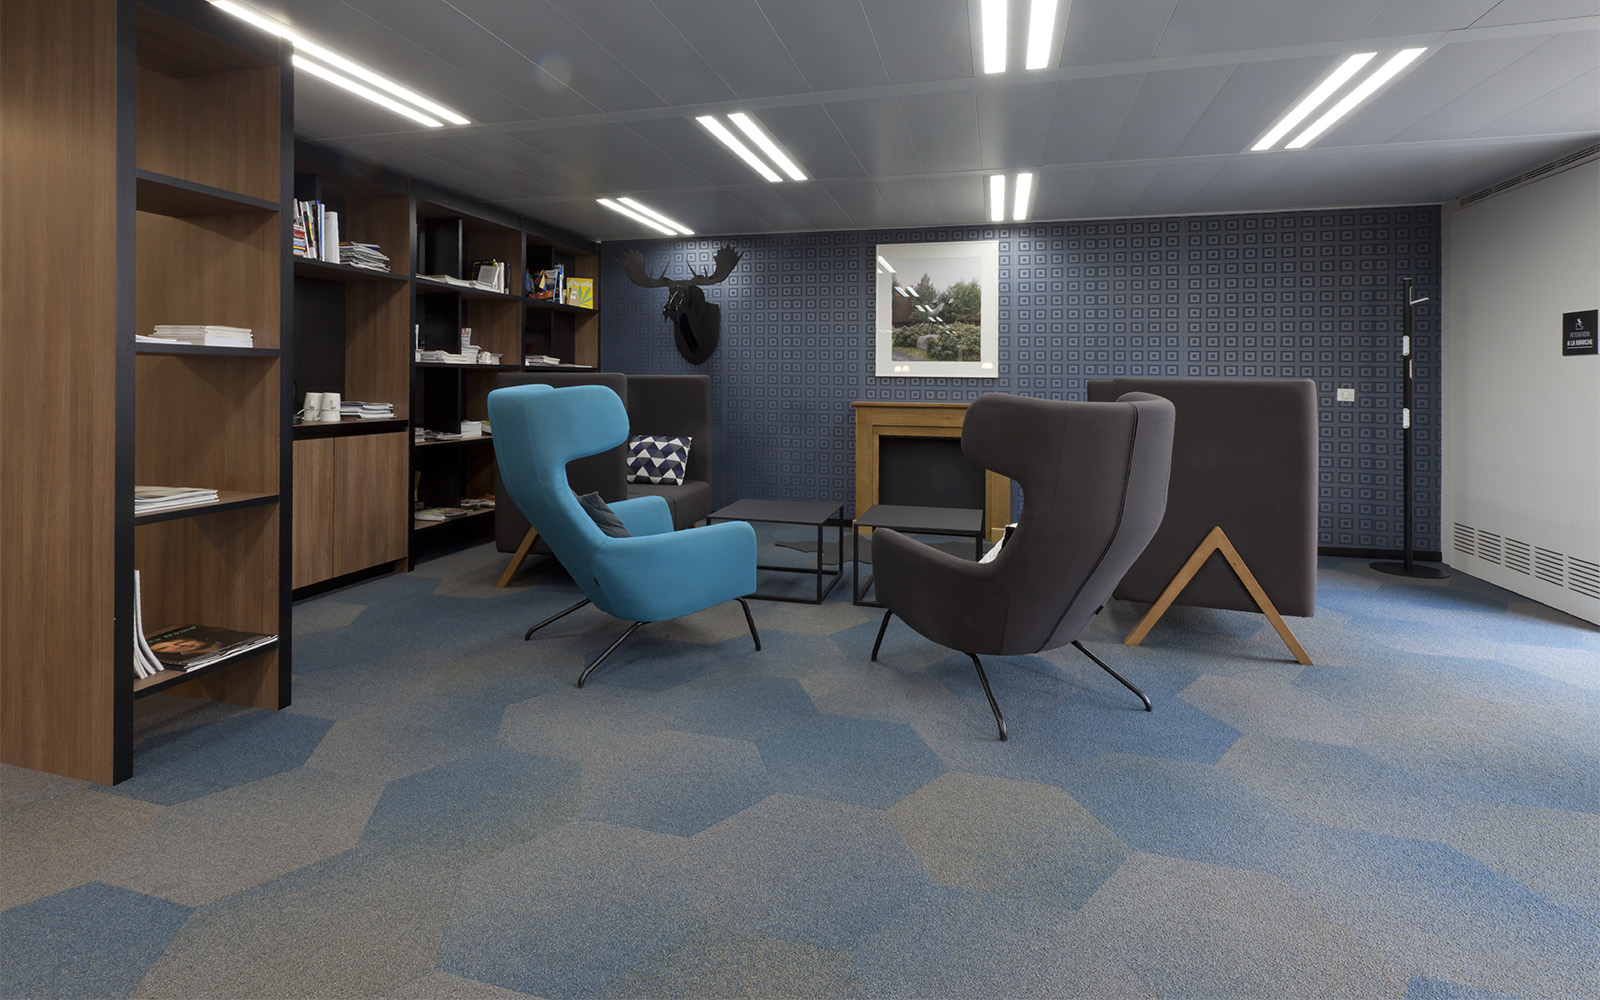 faded blue and beige hexagon carpet tiles by ege in an office setting 